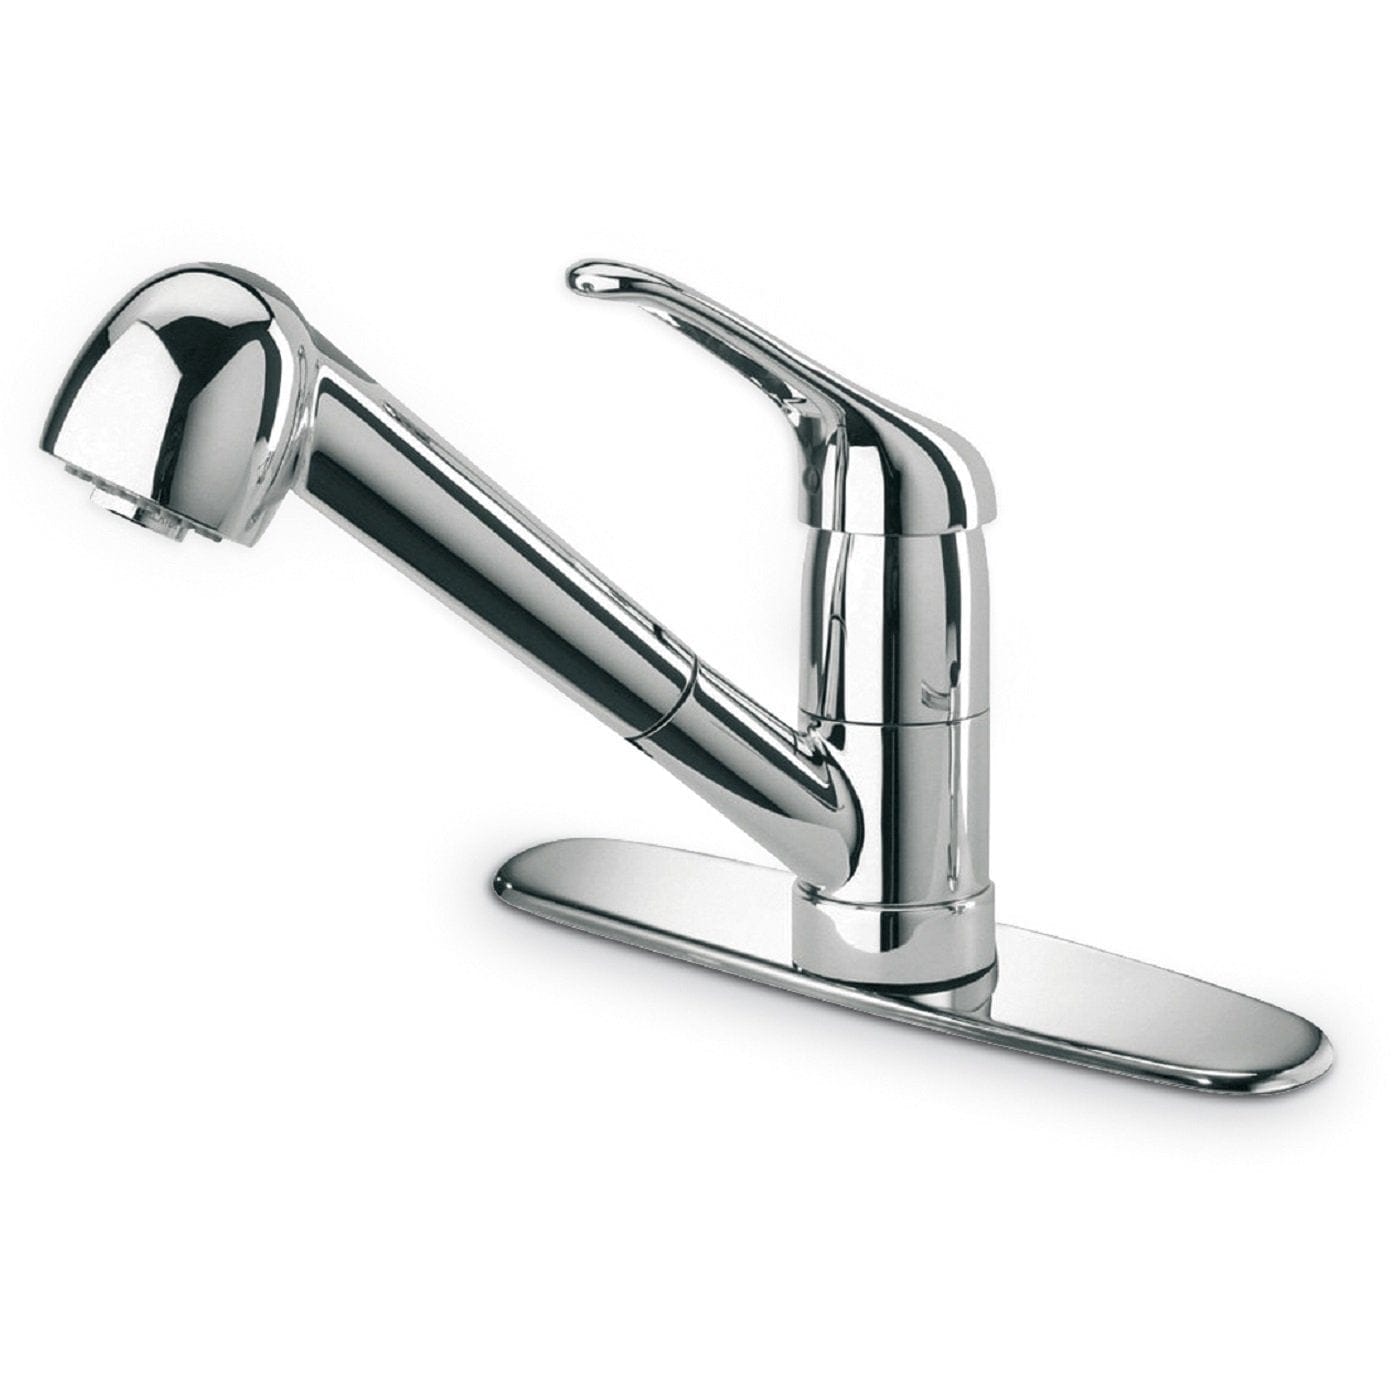 LATOSCANA Dante Single Handle Pull-Out Spray Kitchen Faucet, Chrome - 45CR564 - Manor House Sinks